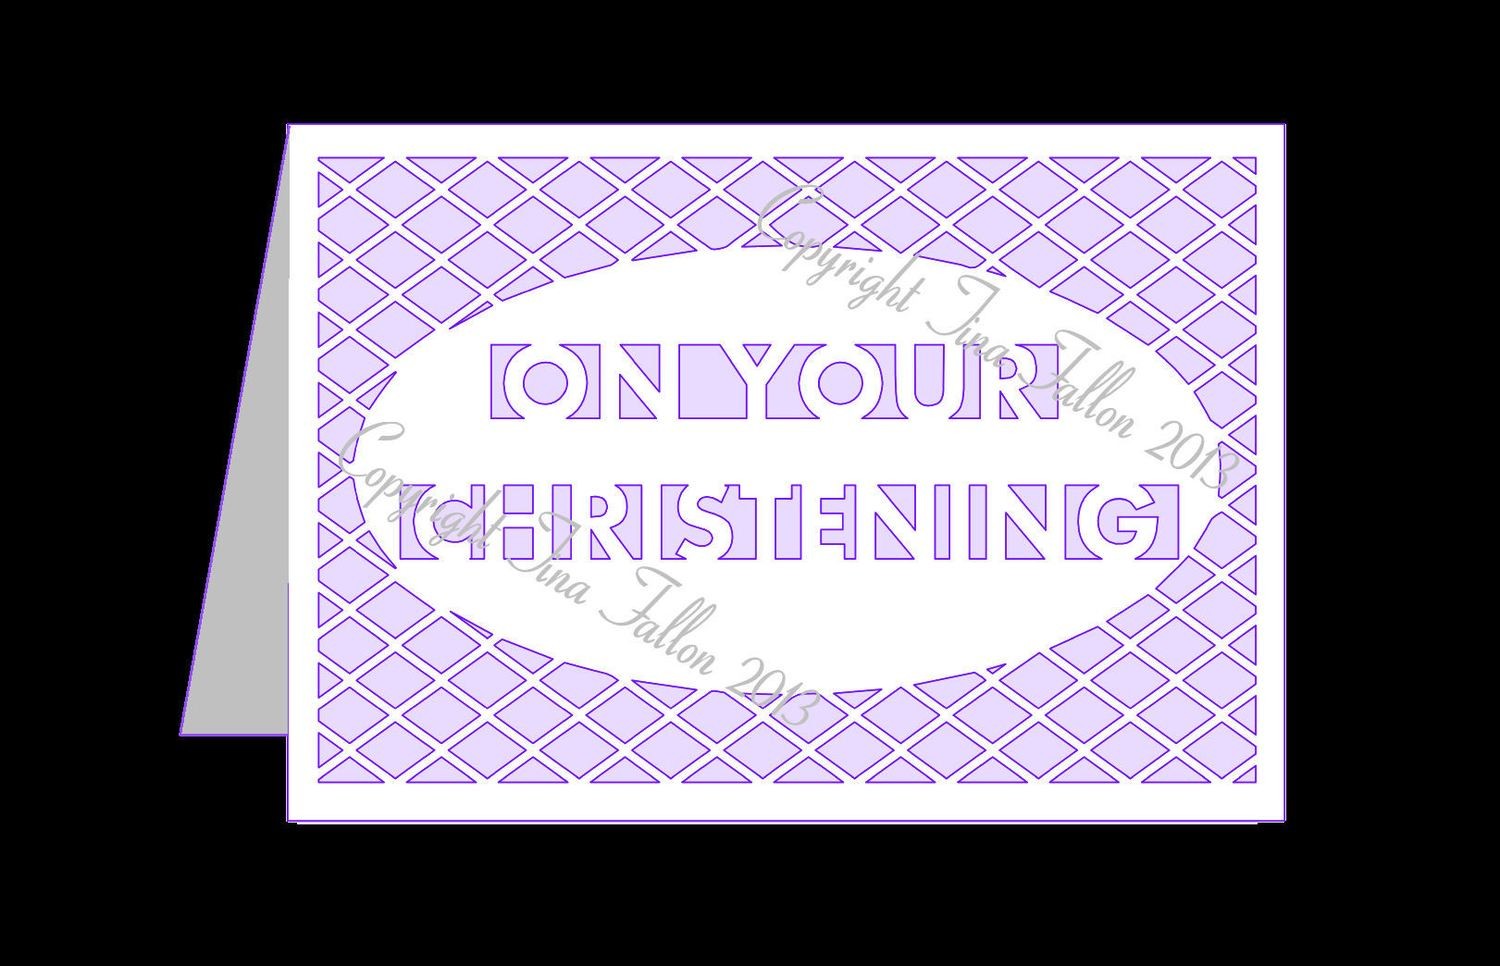 On your Christening Card Template with lattice cut out